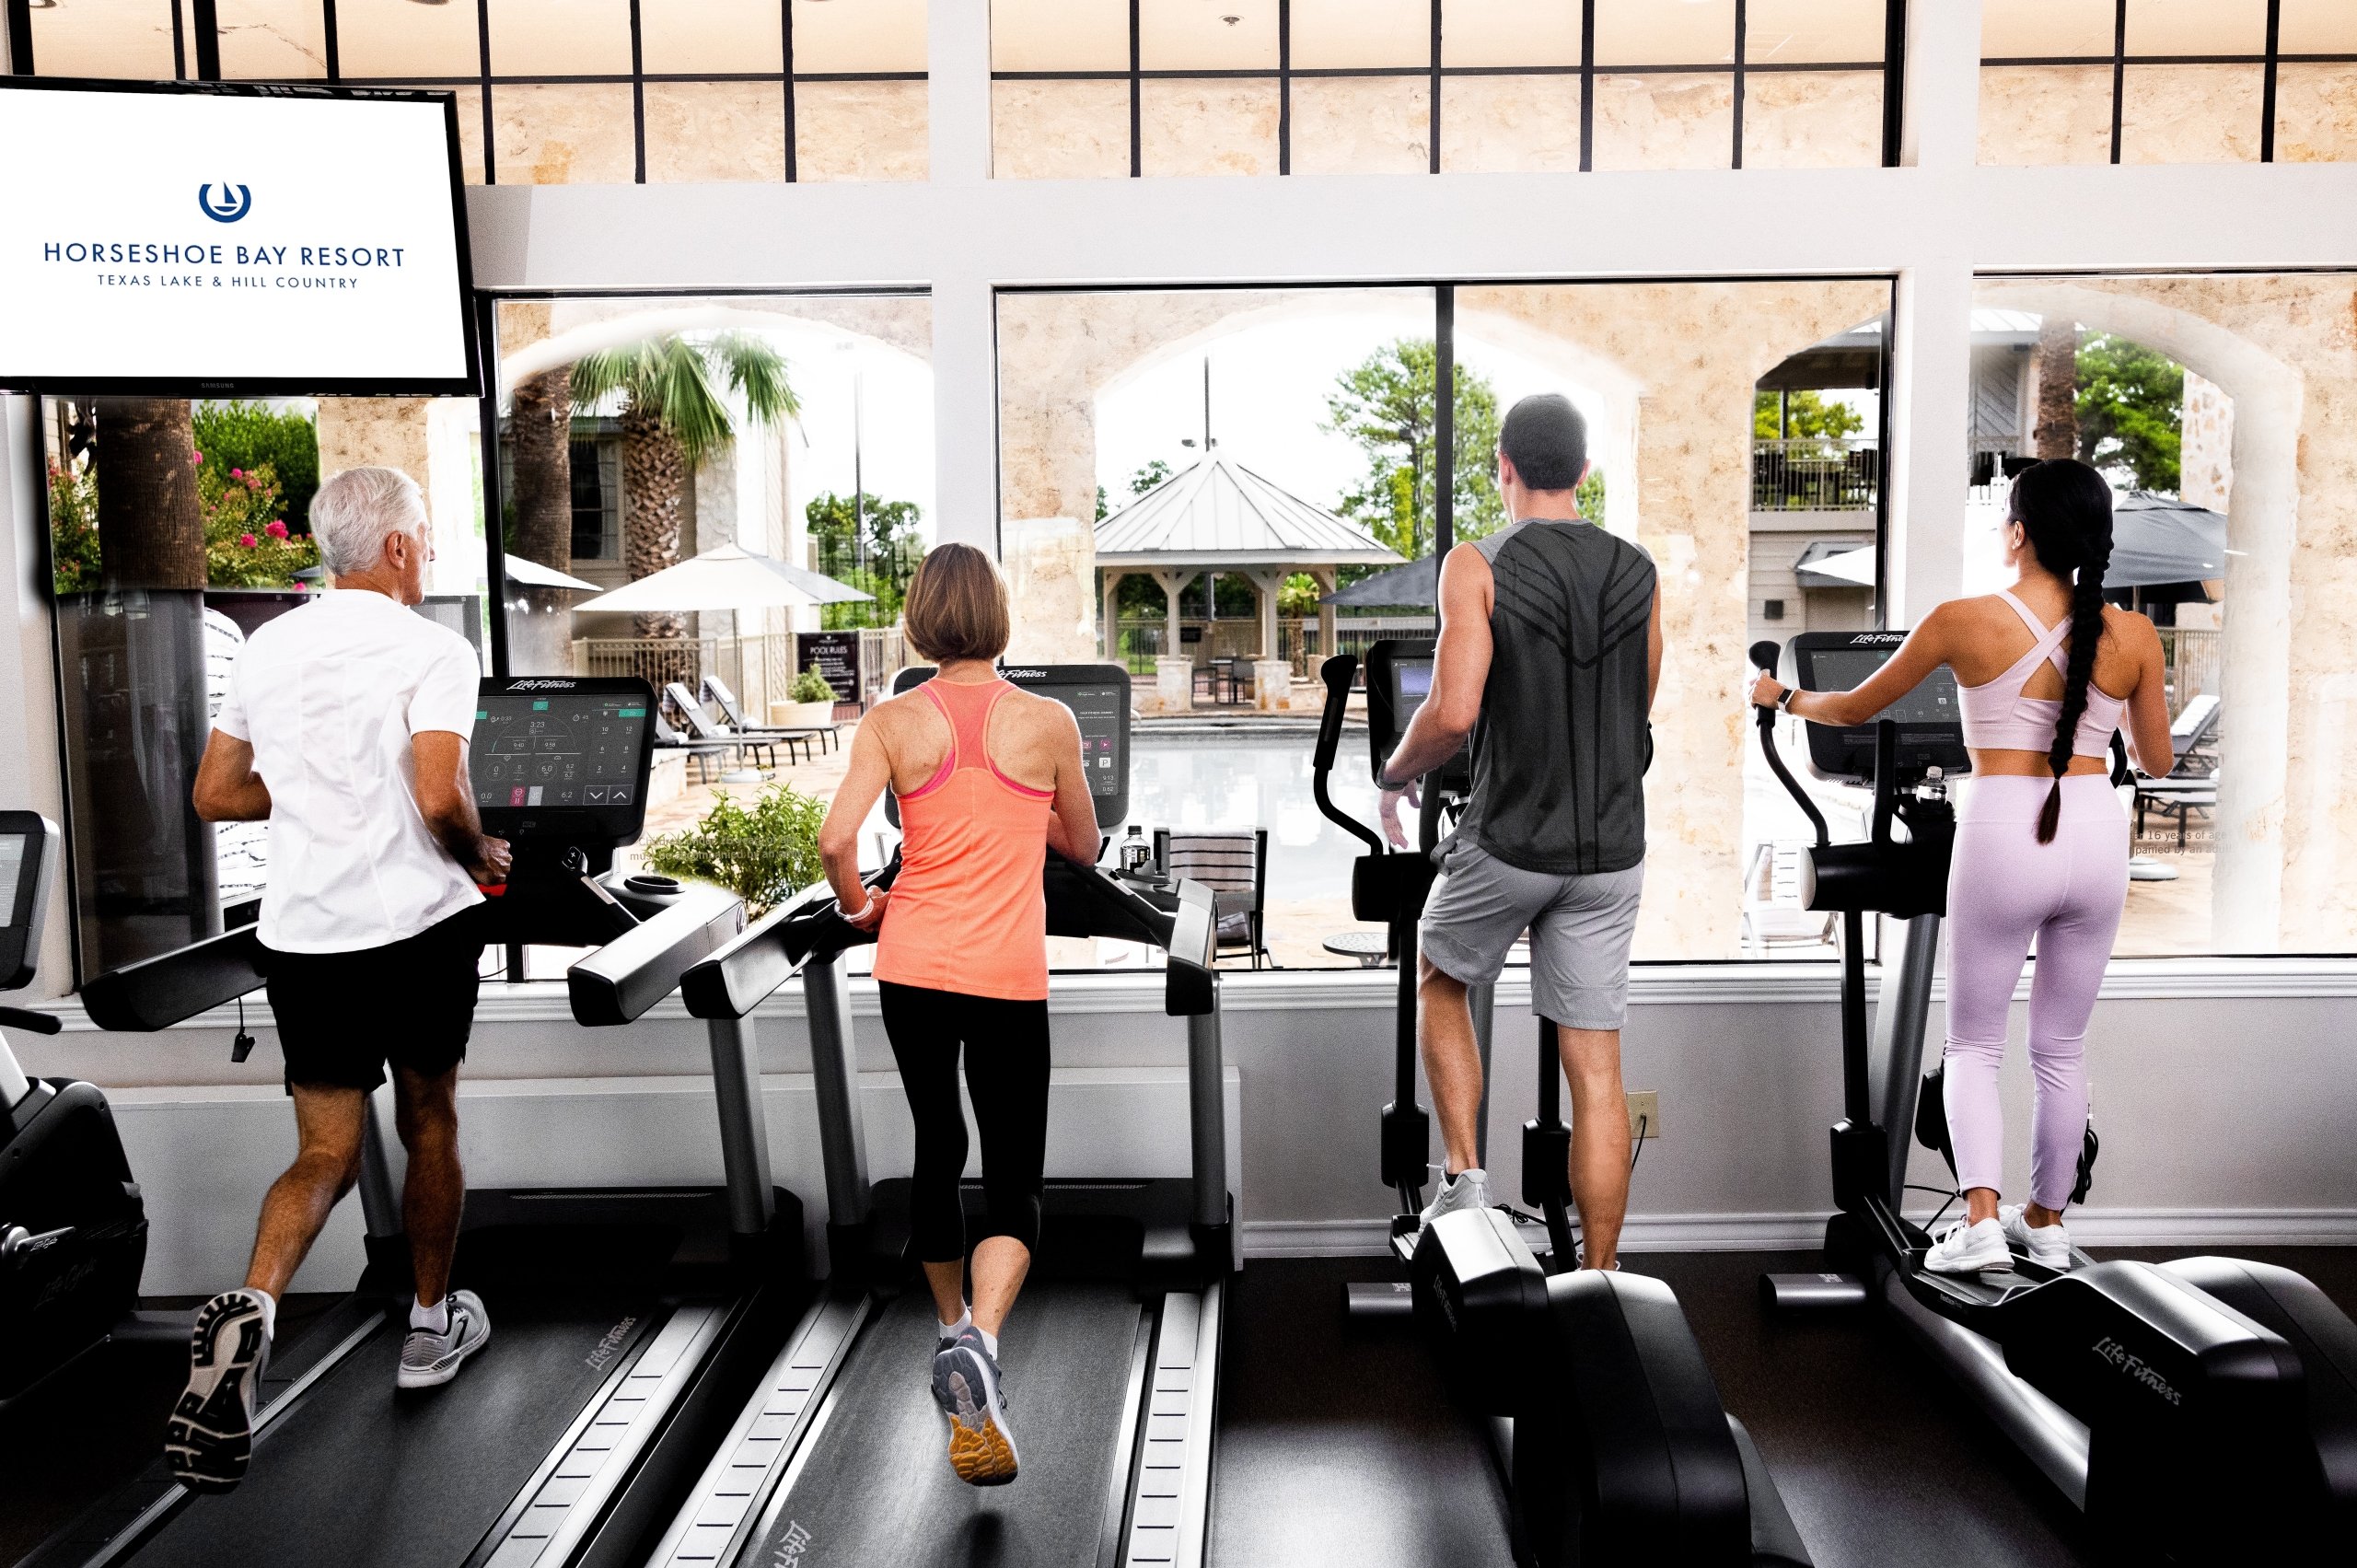 Four people (2 men and 2 woman) on the treadmills at the gym.